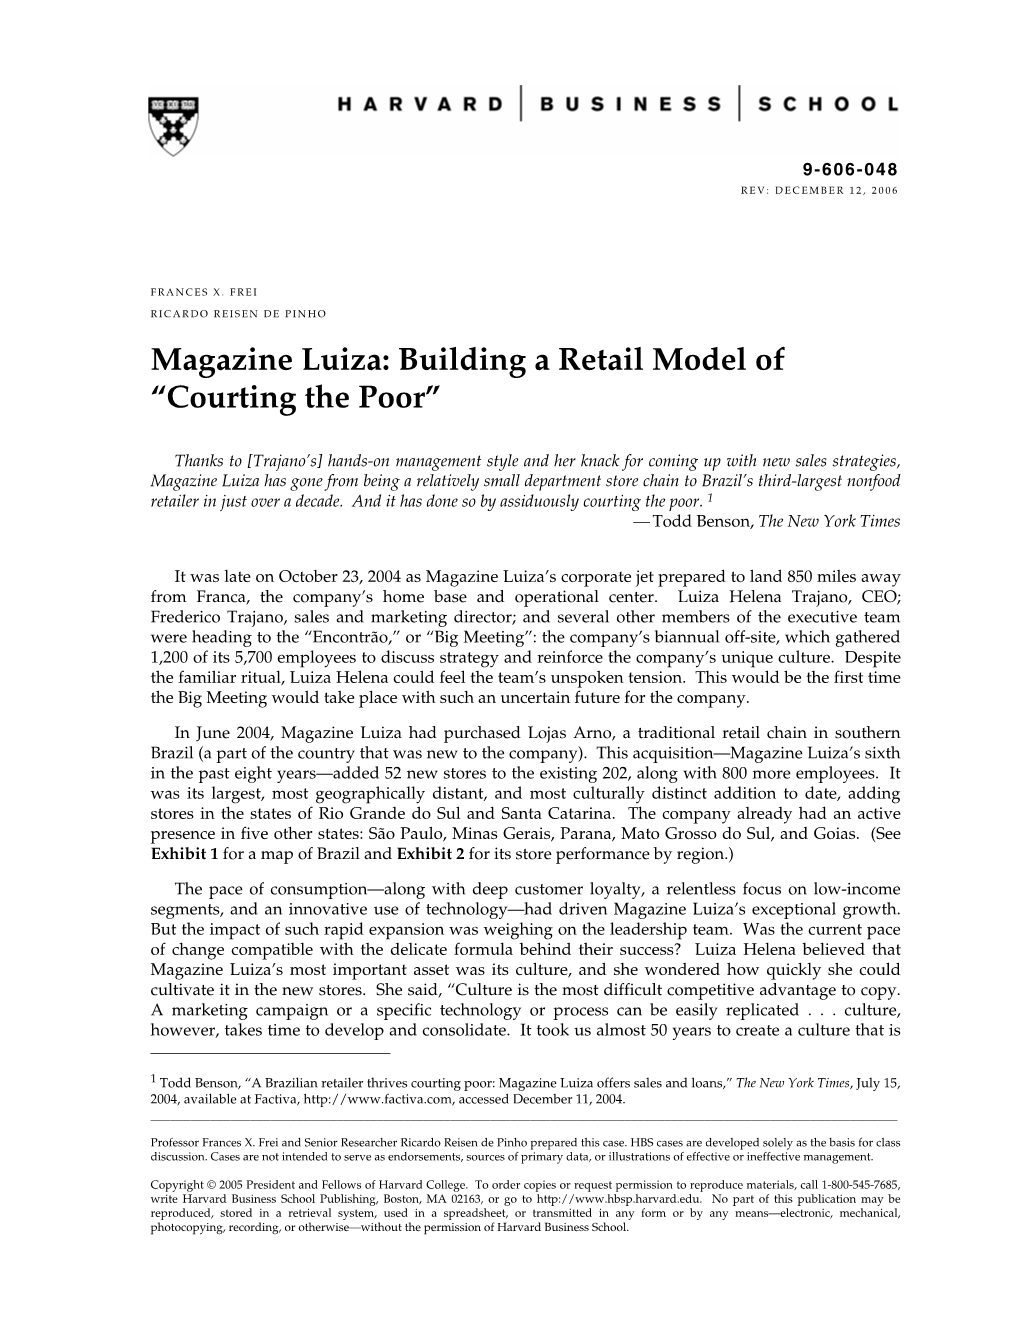 Magazine Luiza: Building a Retail Model of “Courting the Poor”